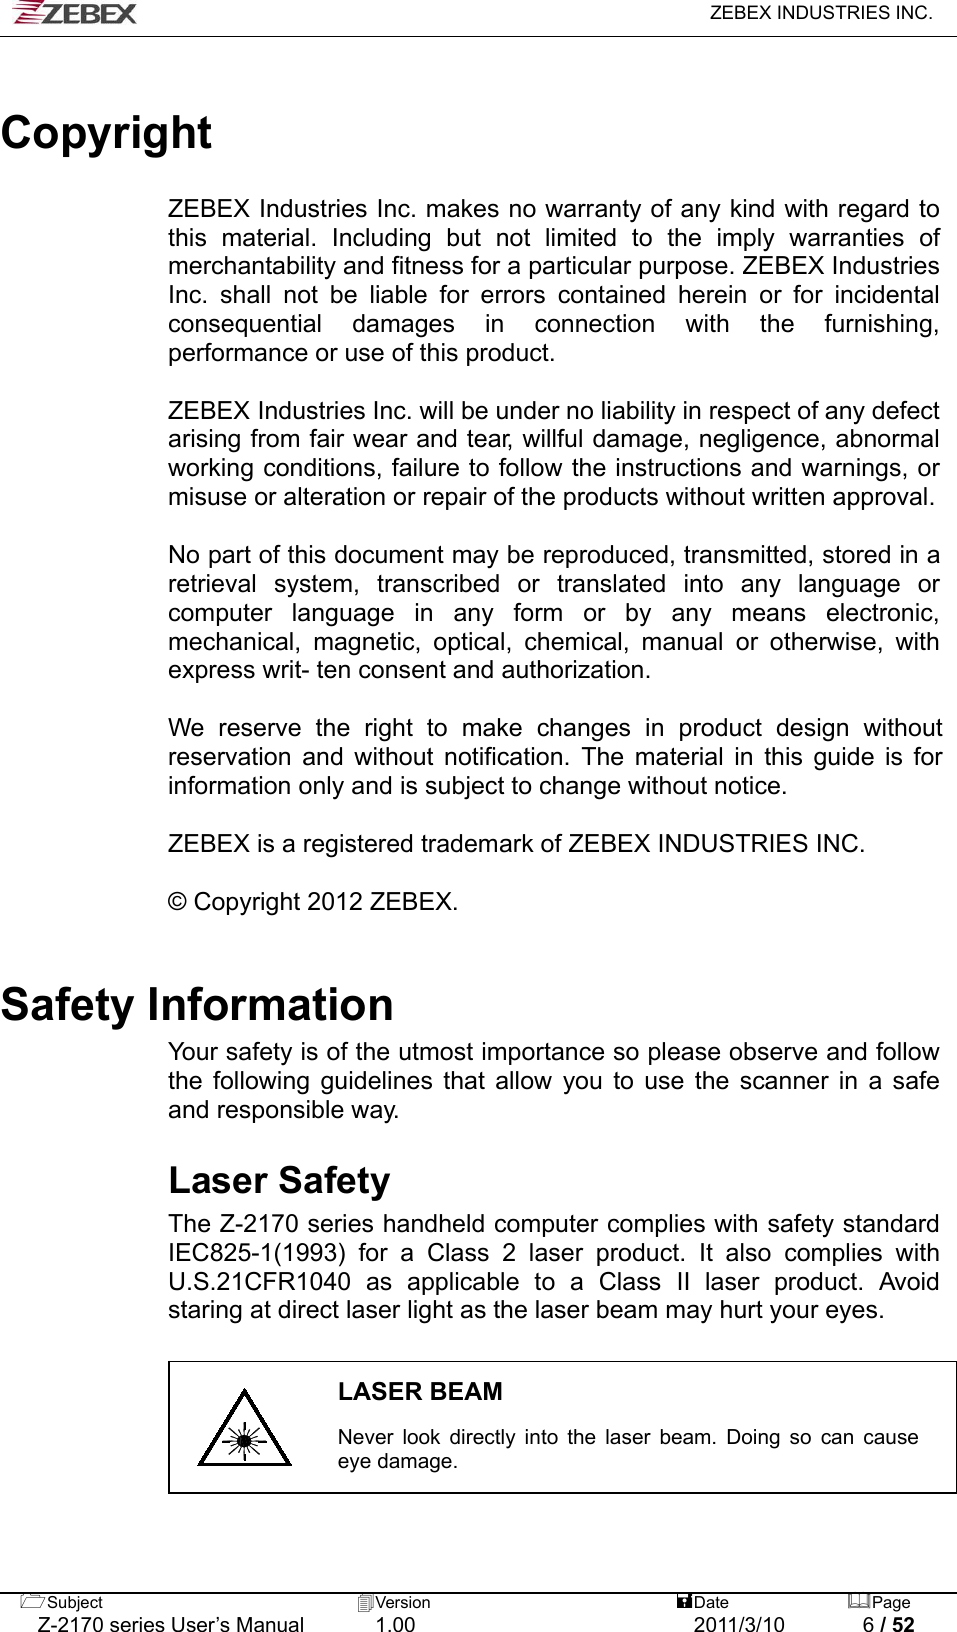   ZEBEX INDUSTRIES INC.  Subject  Version   DatePage   Z-2170 series User’s Manual  1.00  2011/3/10  6 / 52   Copyright  ZEBEX Industries Inc. makes no warranty of any kind with regard to this material. Including but not limited to the imply warranties of merchantability and fitness for a particular purpose. ZEBEX Industries Inc. shall not be liable for errors contained herein or for incidental consequential damages in connection with the furnishing, performance or use of this product.  ZEBEX Industries Inc. will be under no liability in respect of any defect arising from fair wear and tear, willful damage, negligence, abnormal working conditions, failure to follow the instructions and warnings, or misuse or alteration or repair of the products without written approval.  No part of this document may be reproduced, transmitted, stored in a retrieval system, transcribed or translated into any language or computer language in any form or by any means electronic, mechanical, magnetic, optical, chemical, manual or otherwise, with express writ- ten consent and authorization.  We reserve the right to make changes in product design without reservation and without notification. The material in this guide is for information only and is subject to change without notice.  ZEBEX is a registered trademark of ZEBEX INDUSTRIES INC.  © Copyright 2012 ZEBEX.    Safety Information Your safety is of the utmost importance so please observe and follow the following guidelines that allow you to use the scanner in a safe and responsible way.   Laser Safety The Z-2170 series handheld computer complies with safety standard IEC825-1(1993) for a Class 2 laser product. It also complies with U.S.21CFR1040 as applicable to a Class II laser product. Avoid staring at direct laser light as the laser beam may hurt your eyes.   LASER BEAM  Never look directly into the laser beam. Doing so can cause eye damage.    